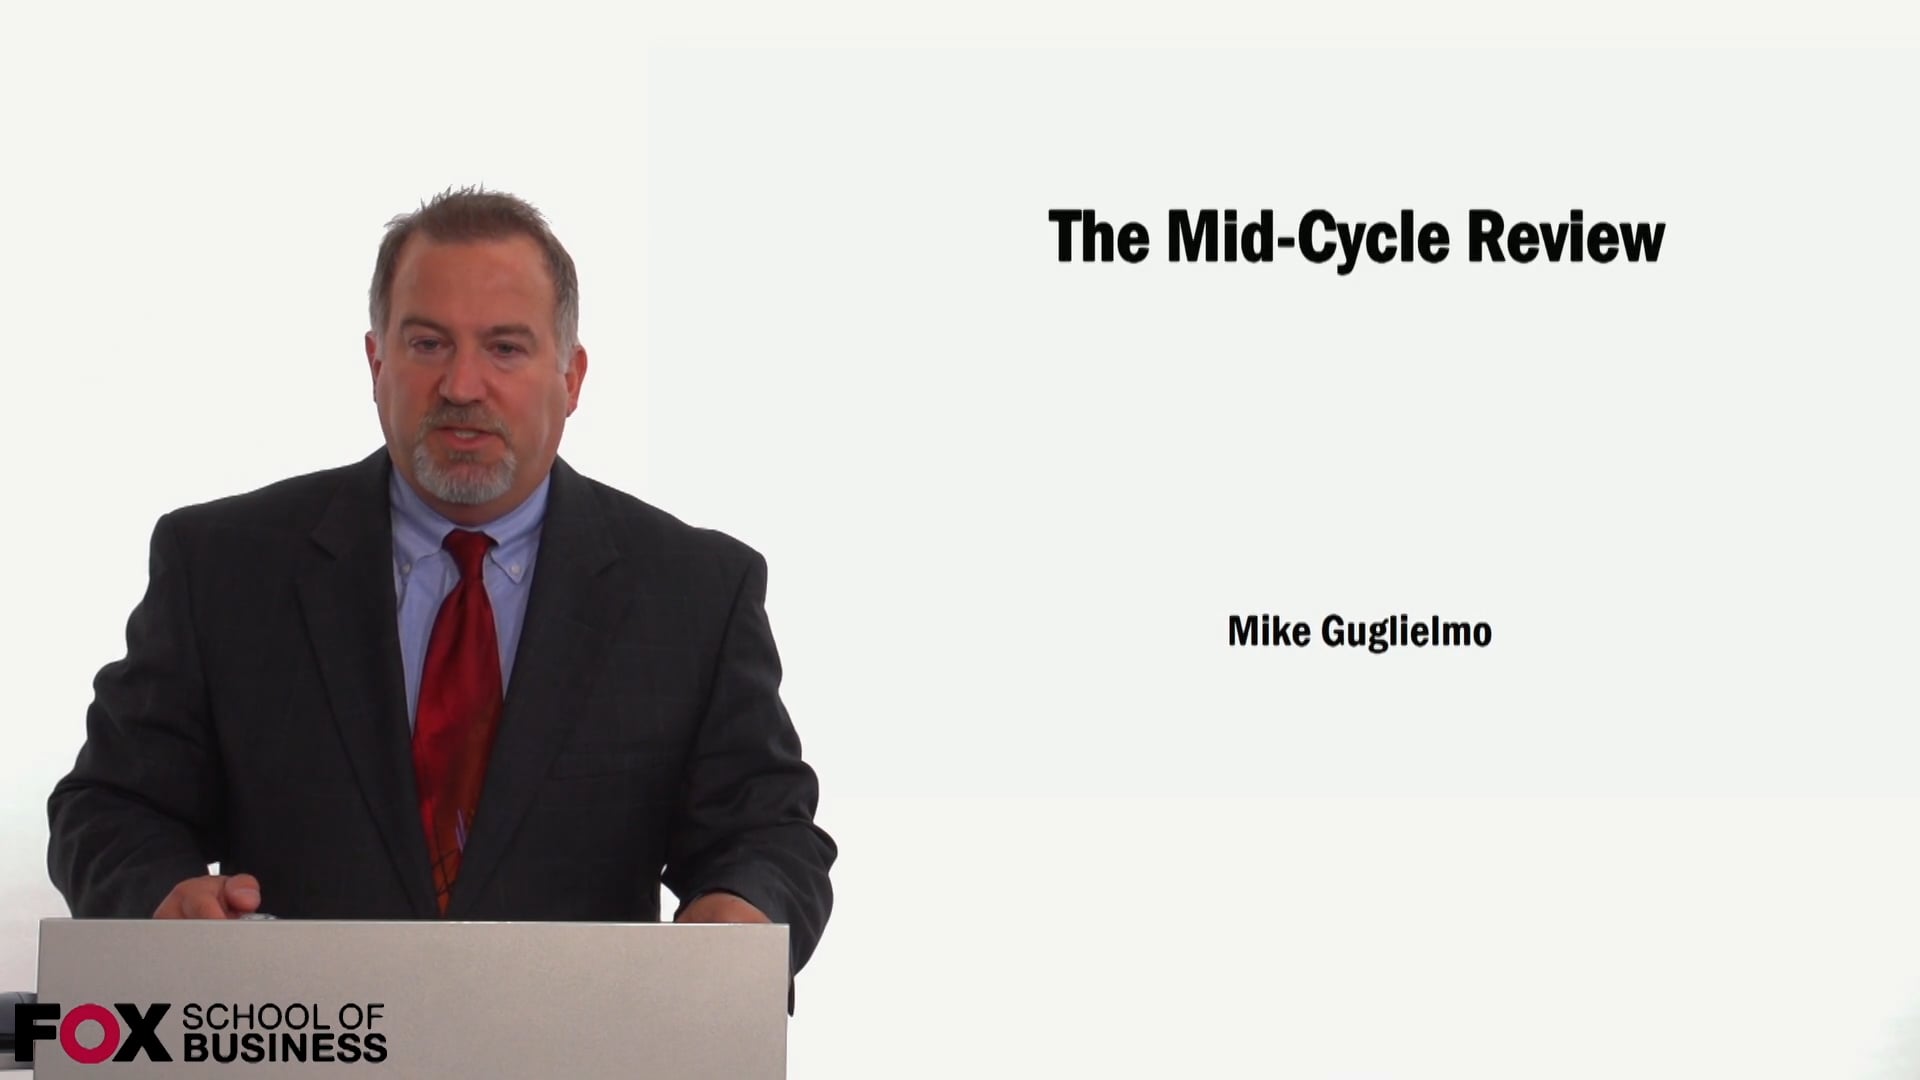 The Mid-Cycle Review